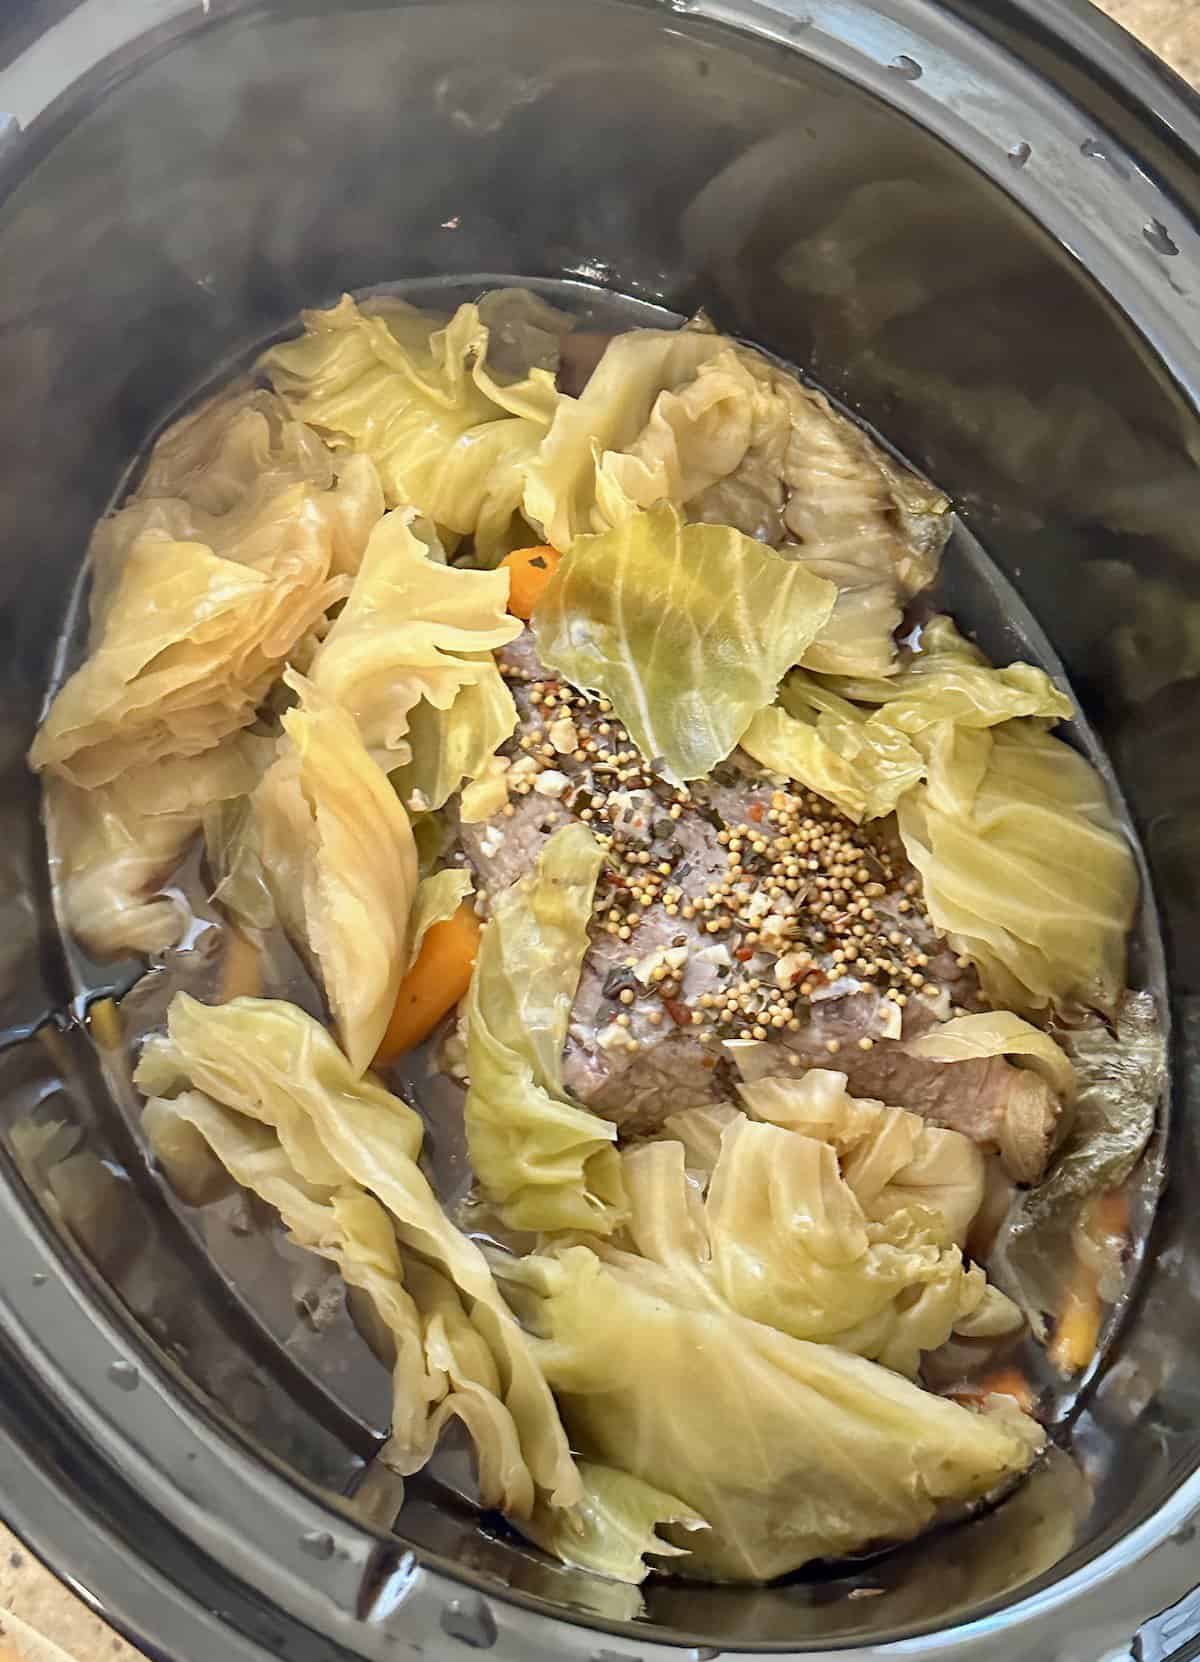 cooked cabbage, carrots and corned beef in a crock pot